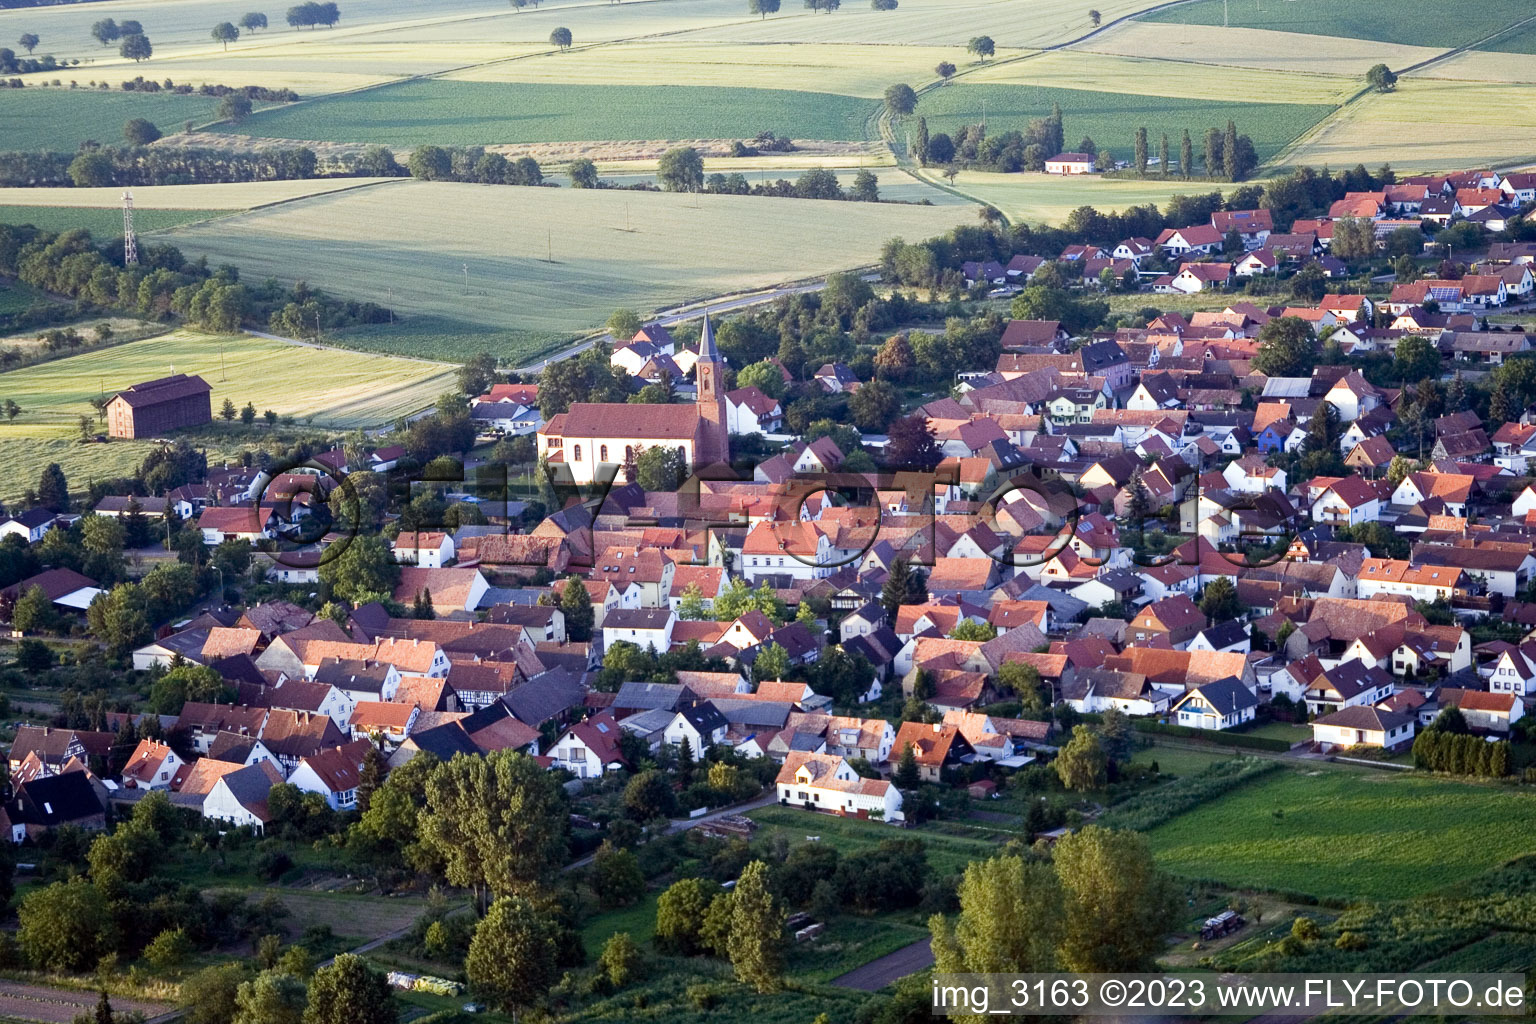 Kapsweyer in the state Rhineland-Palatinate, Germany from a drone